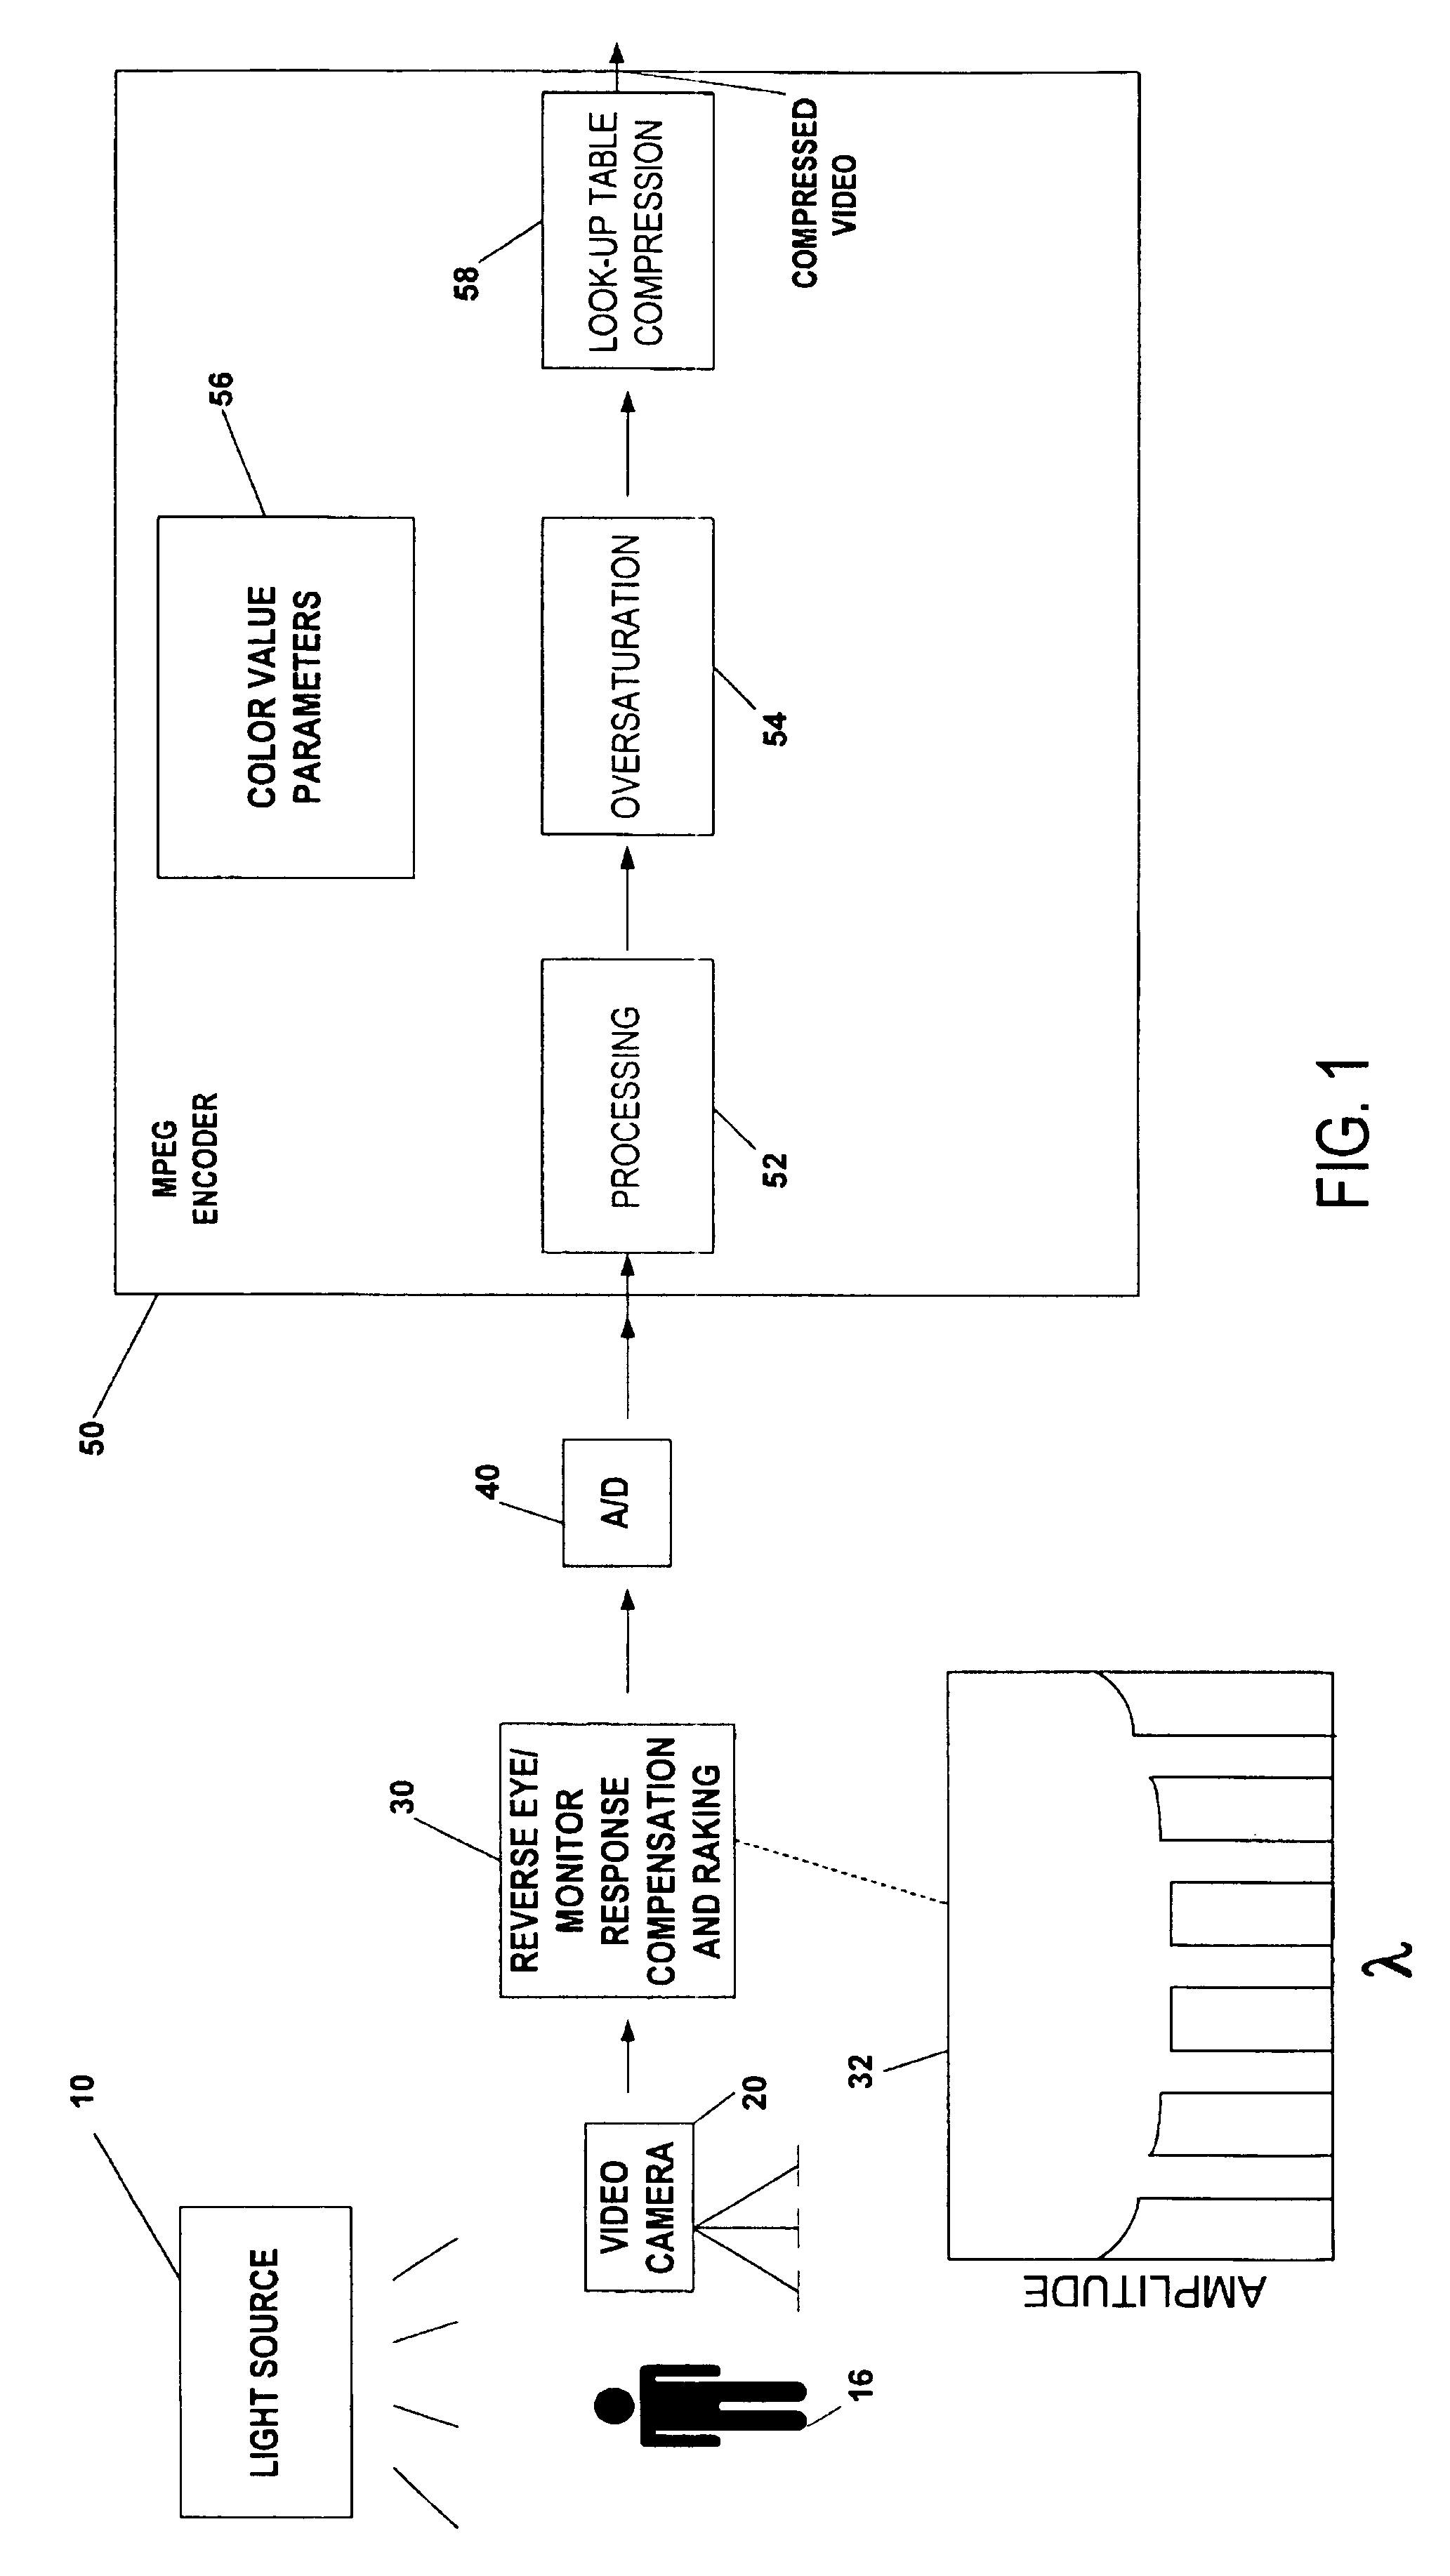 Matching of a reduced spectrum lighting source with video encoding program variables for increased data compression ratios